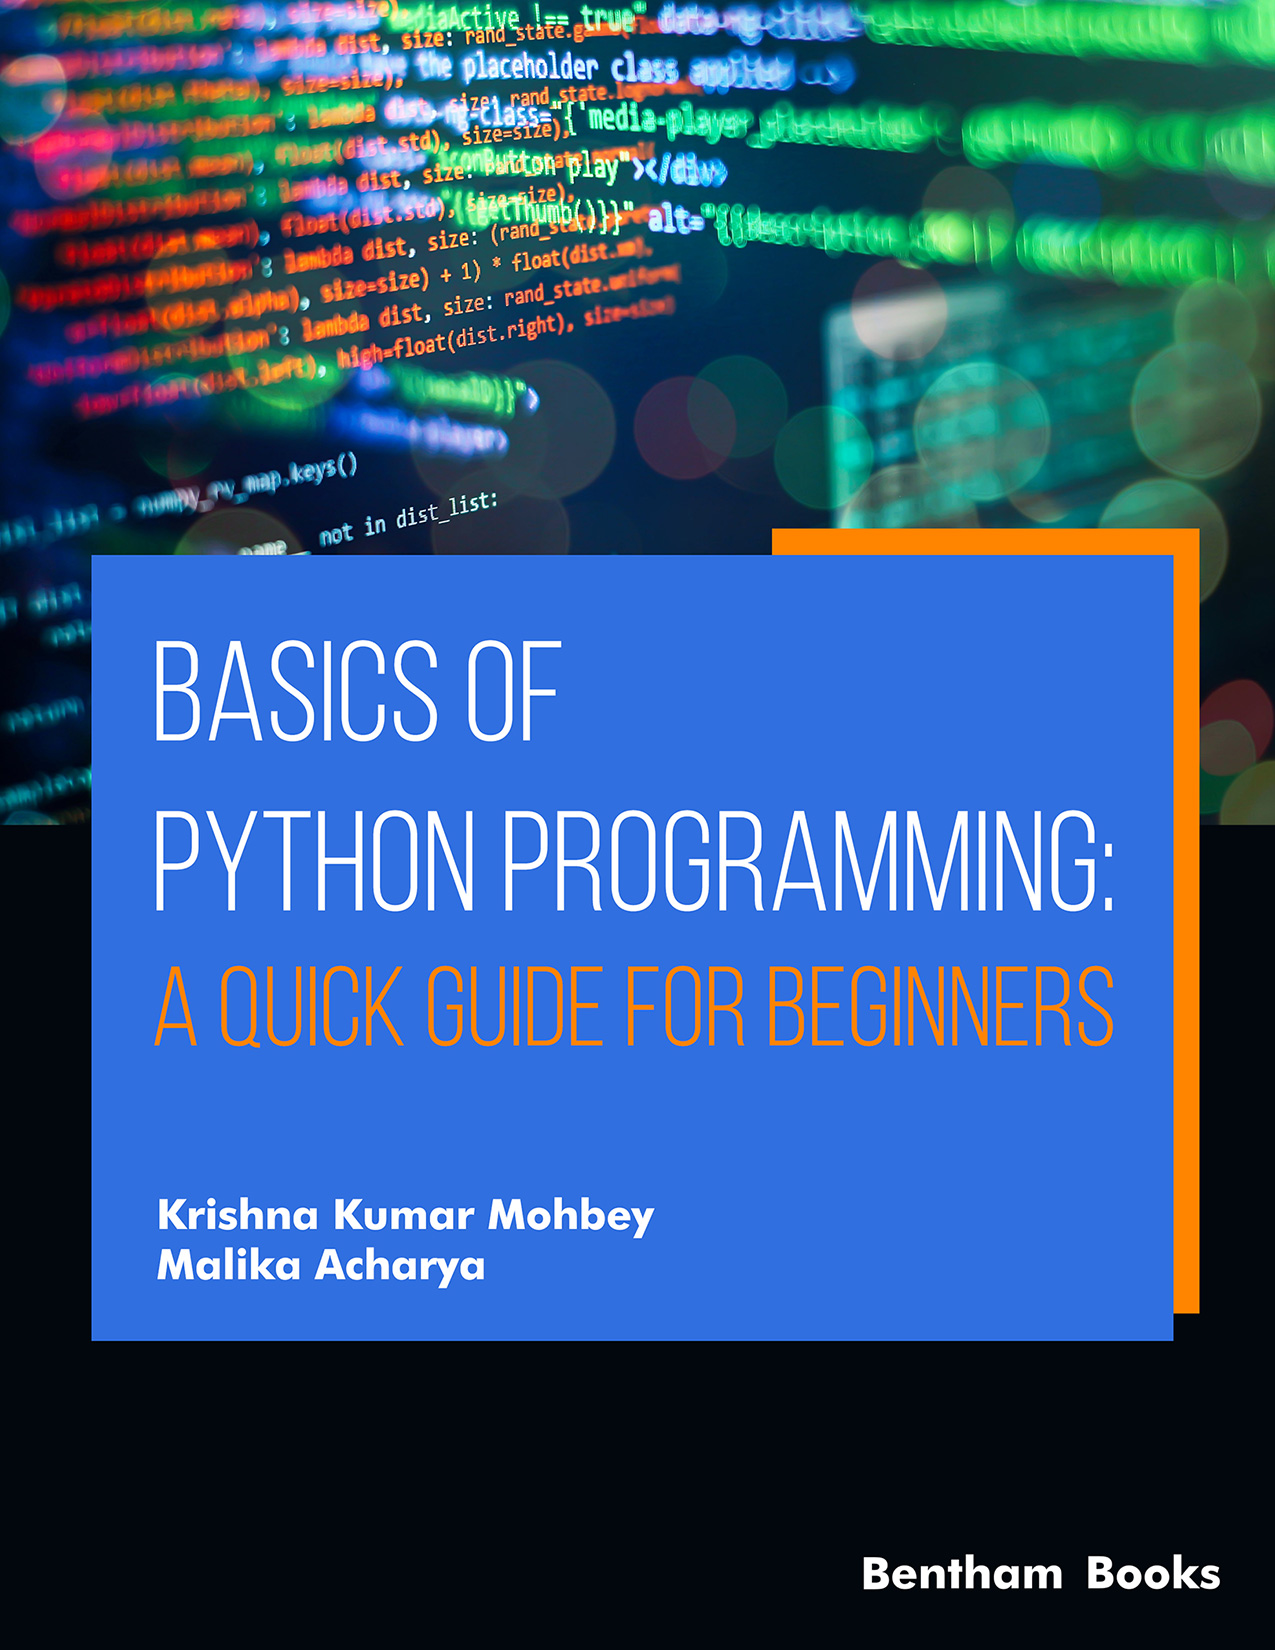 Basics of Python Programming: A Quick Guide for Beginners